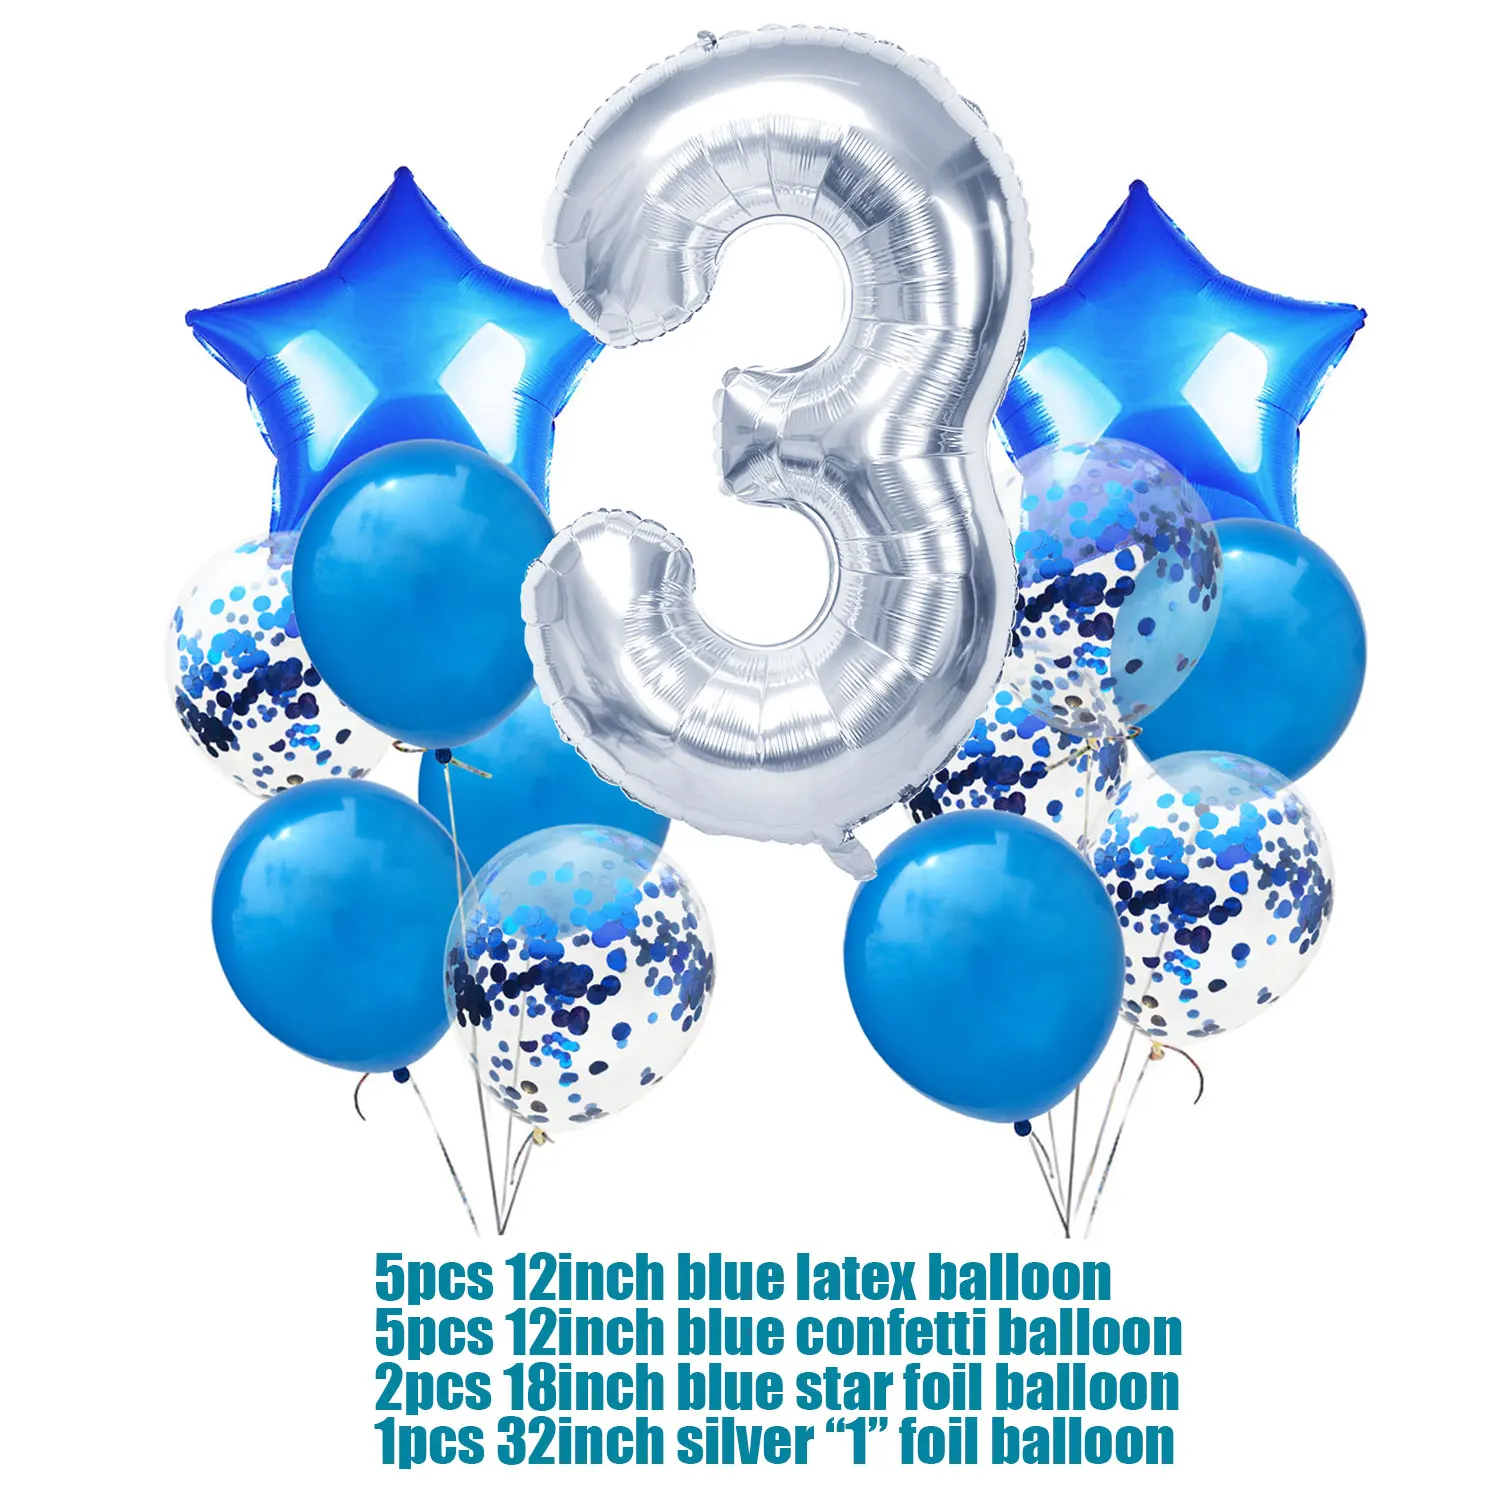 New Baby Shower Balloon Design Invitations Decorations You choose 